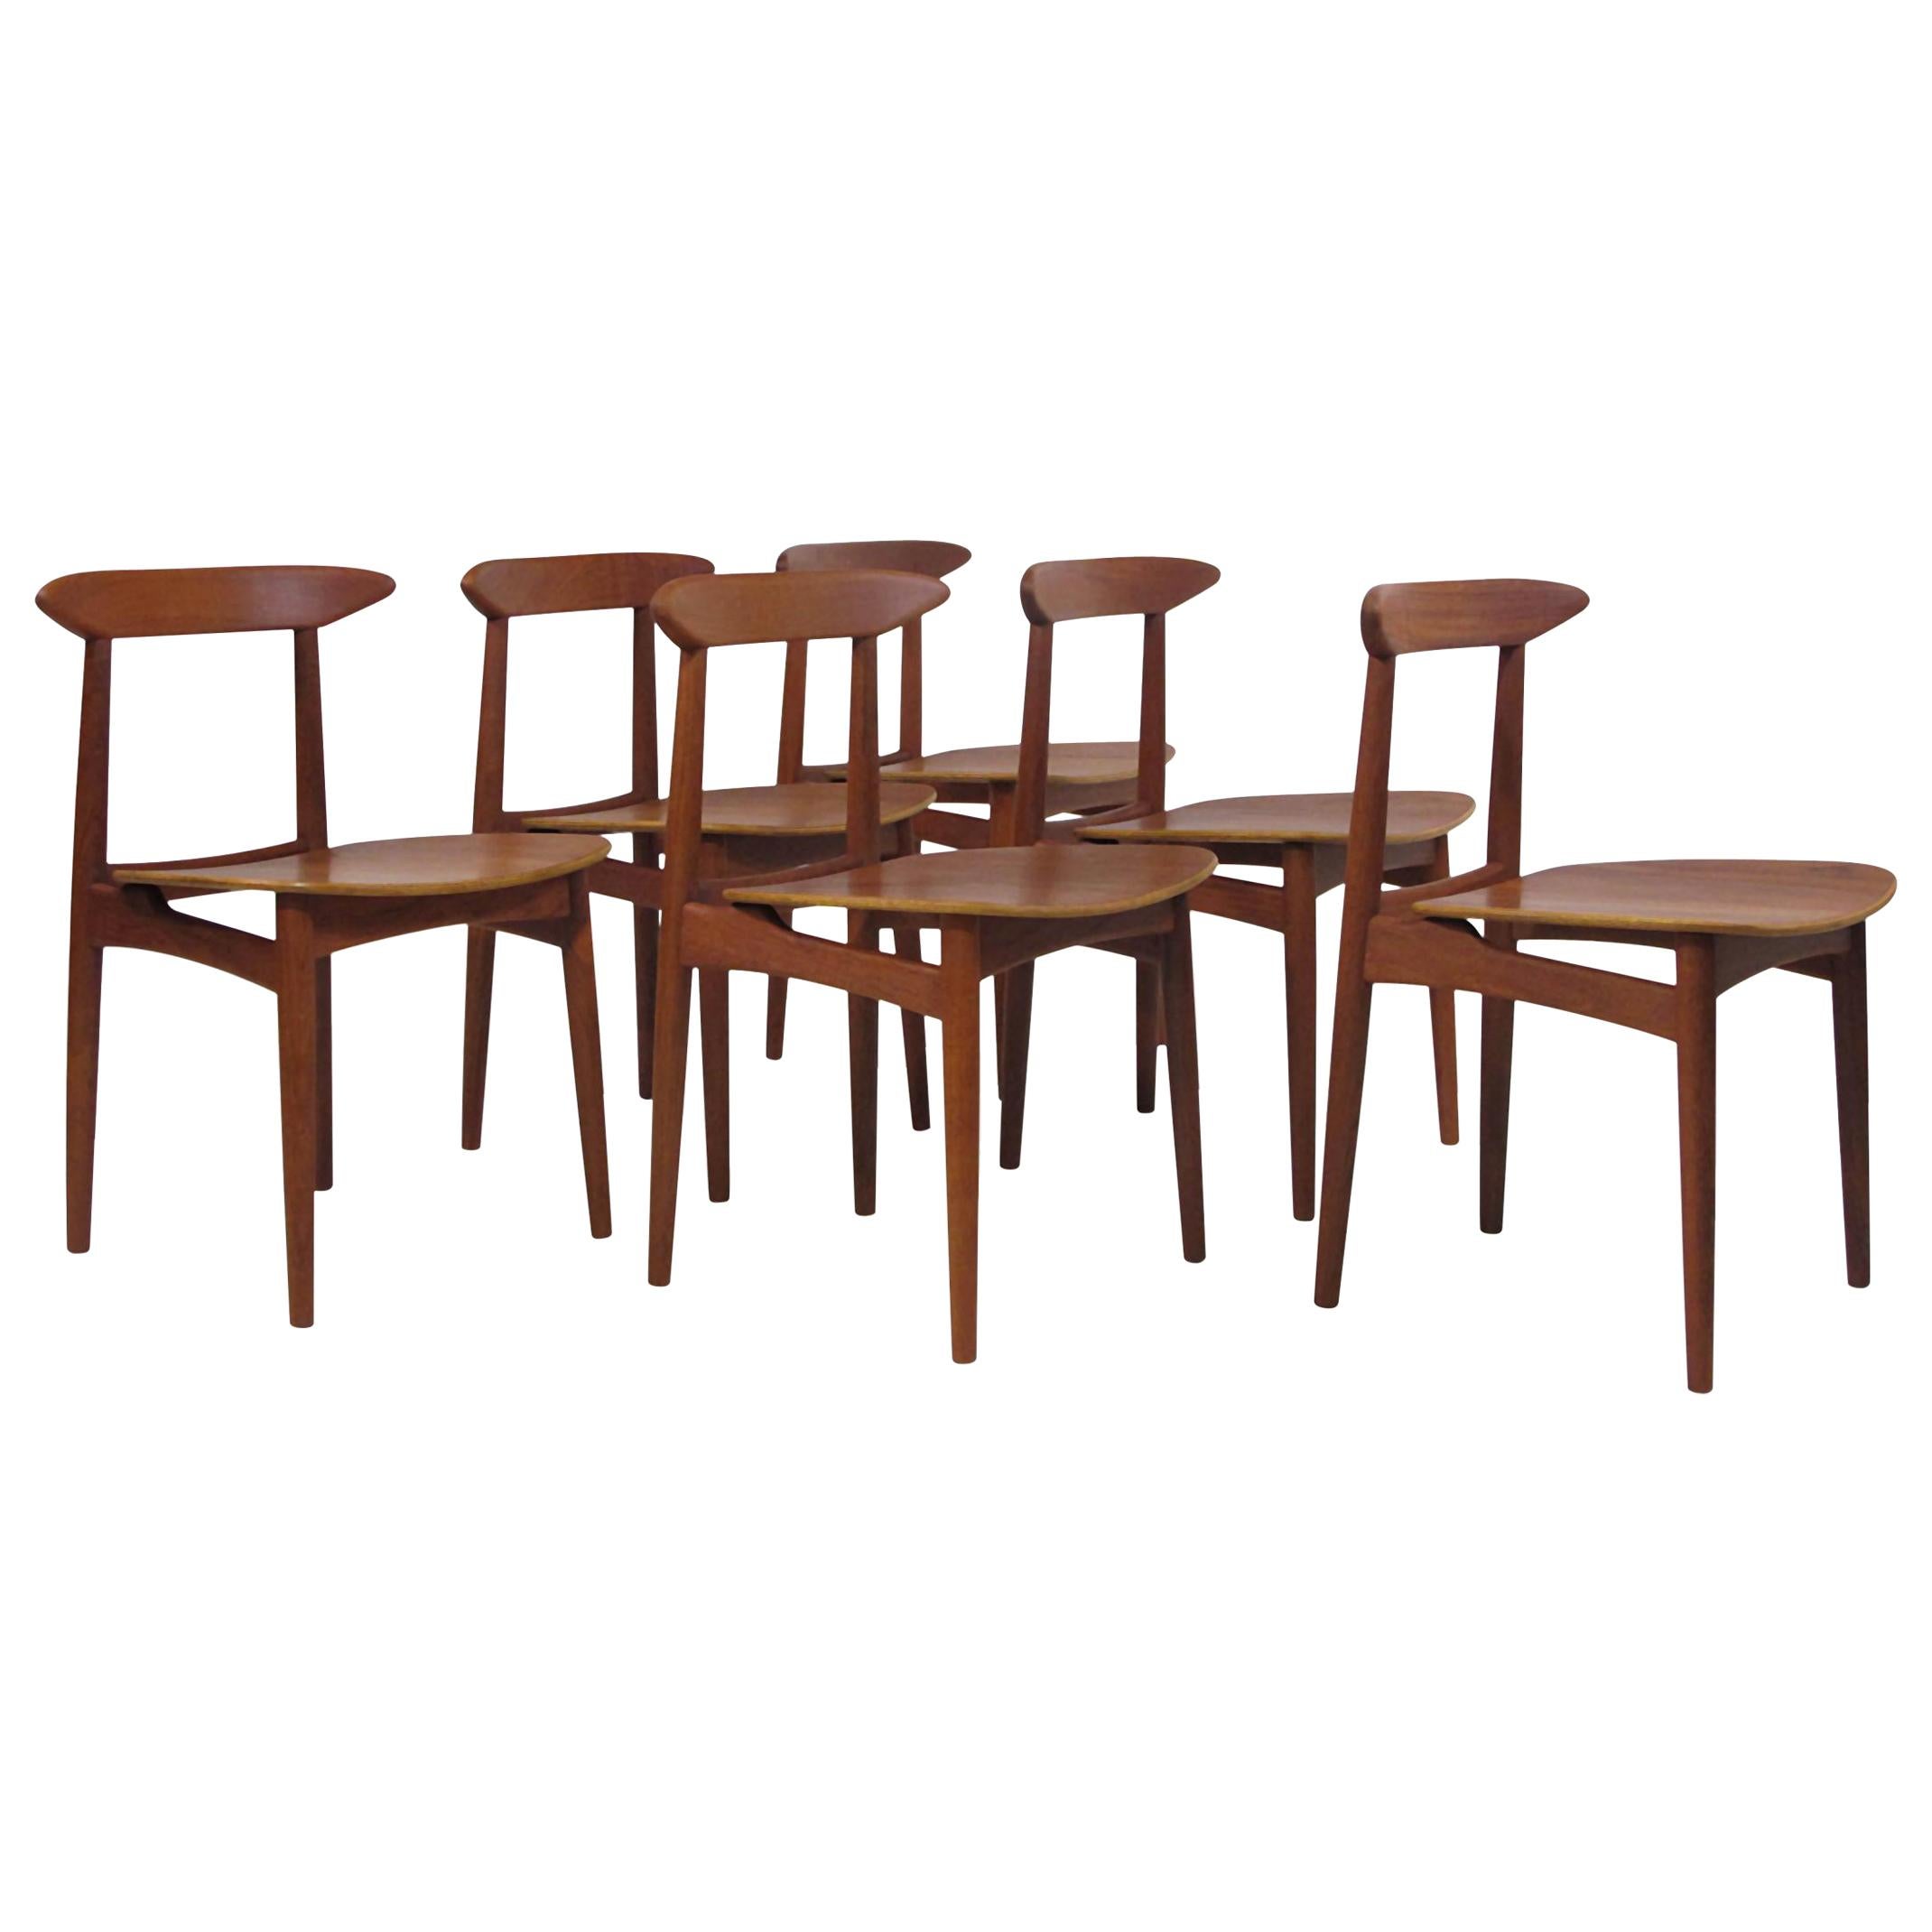 Danish Teak Dining Chairs with Wooden Seats For Sale